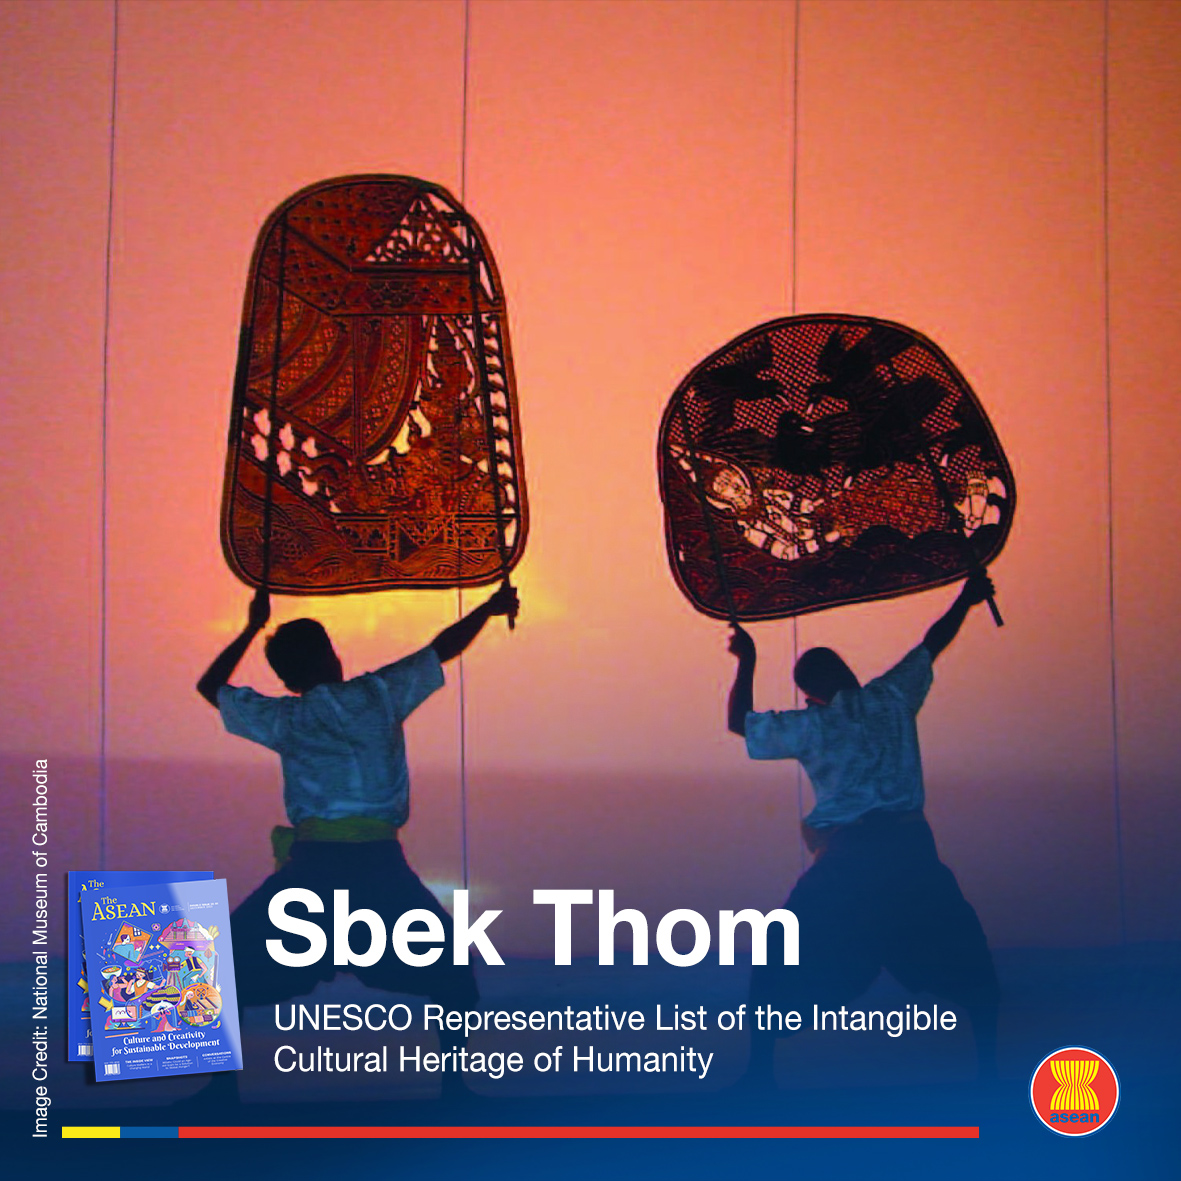 The UNESCO List of intangible cultural heritage contains practices, representations, expressions, knowledge, and skills recognised as a part of a country’s cultural heritage. Do you know which ASEAN Member States are in the list? Read more about it: bit.ly/3Nxeu9n